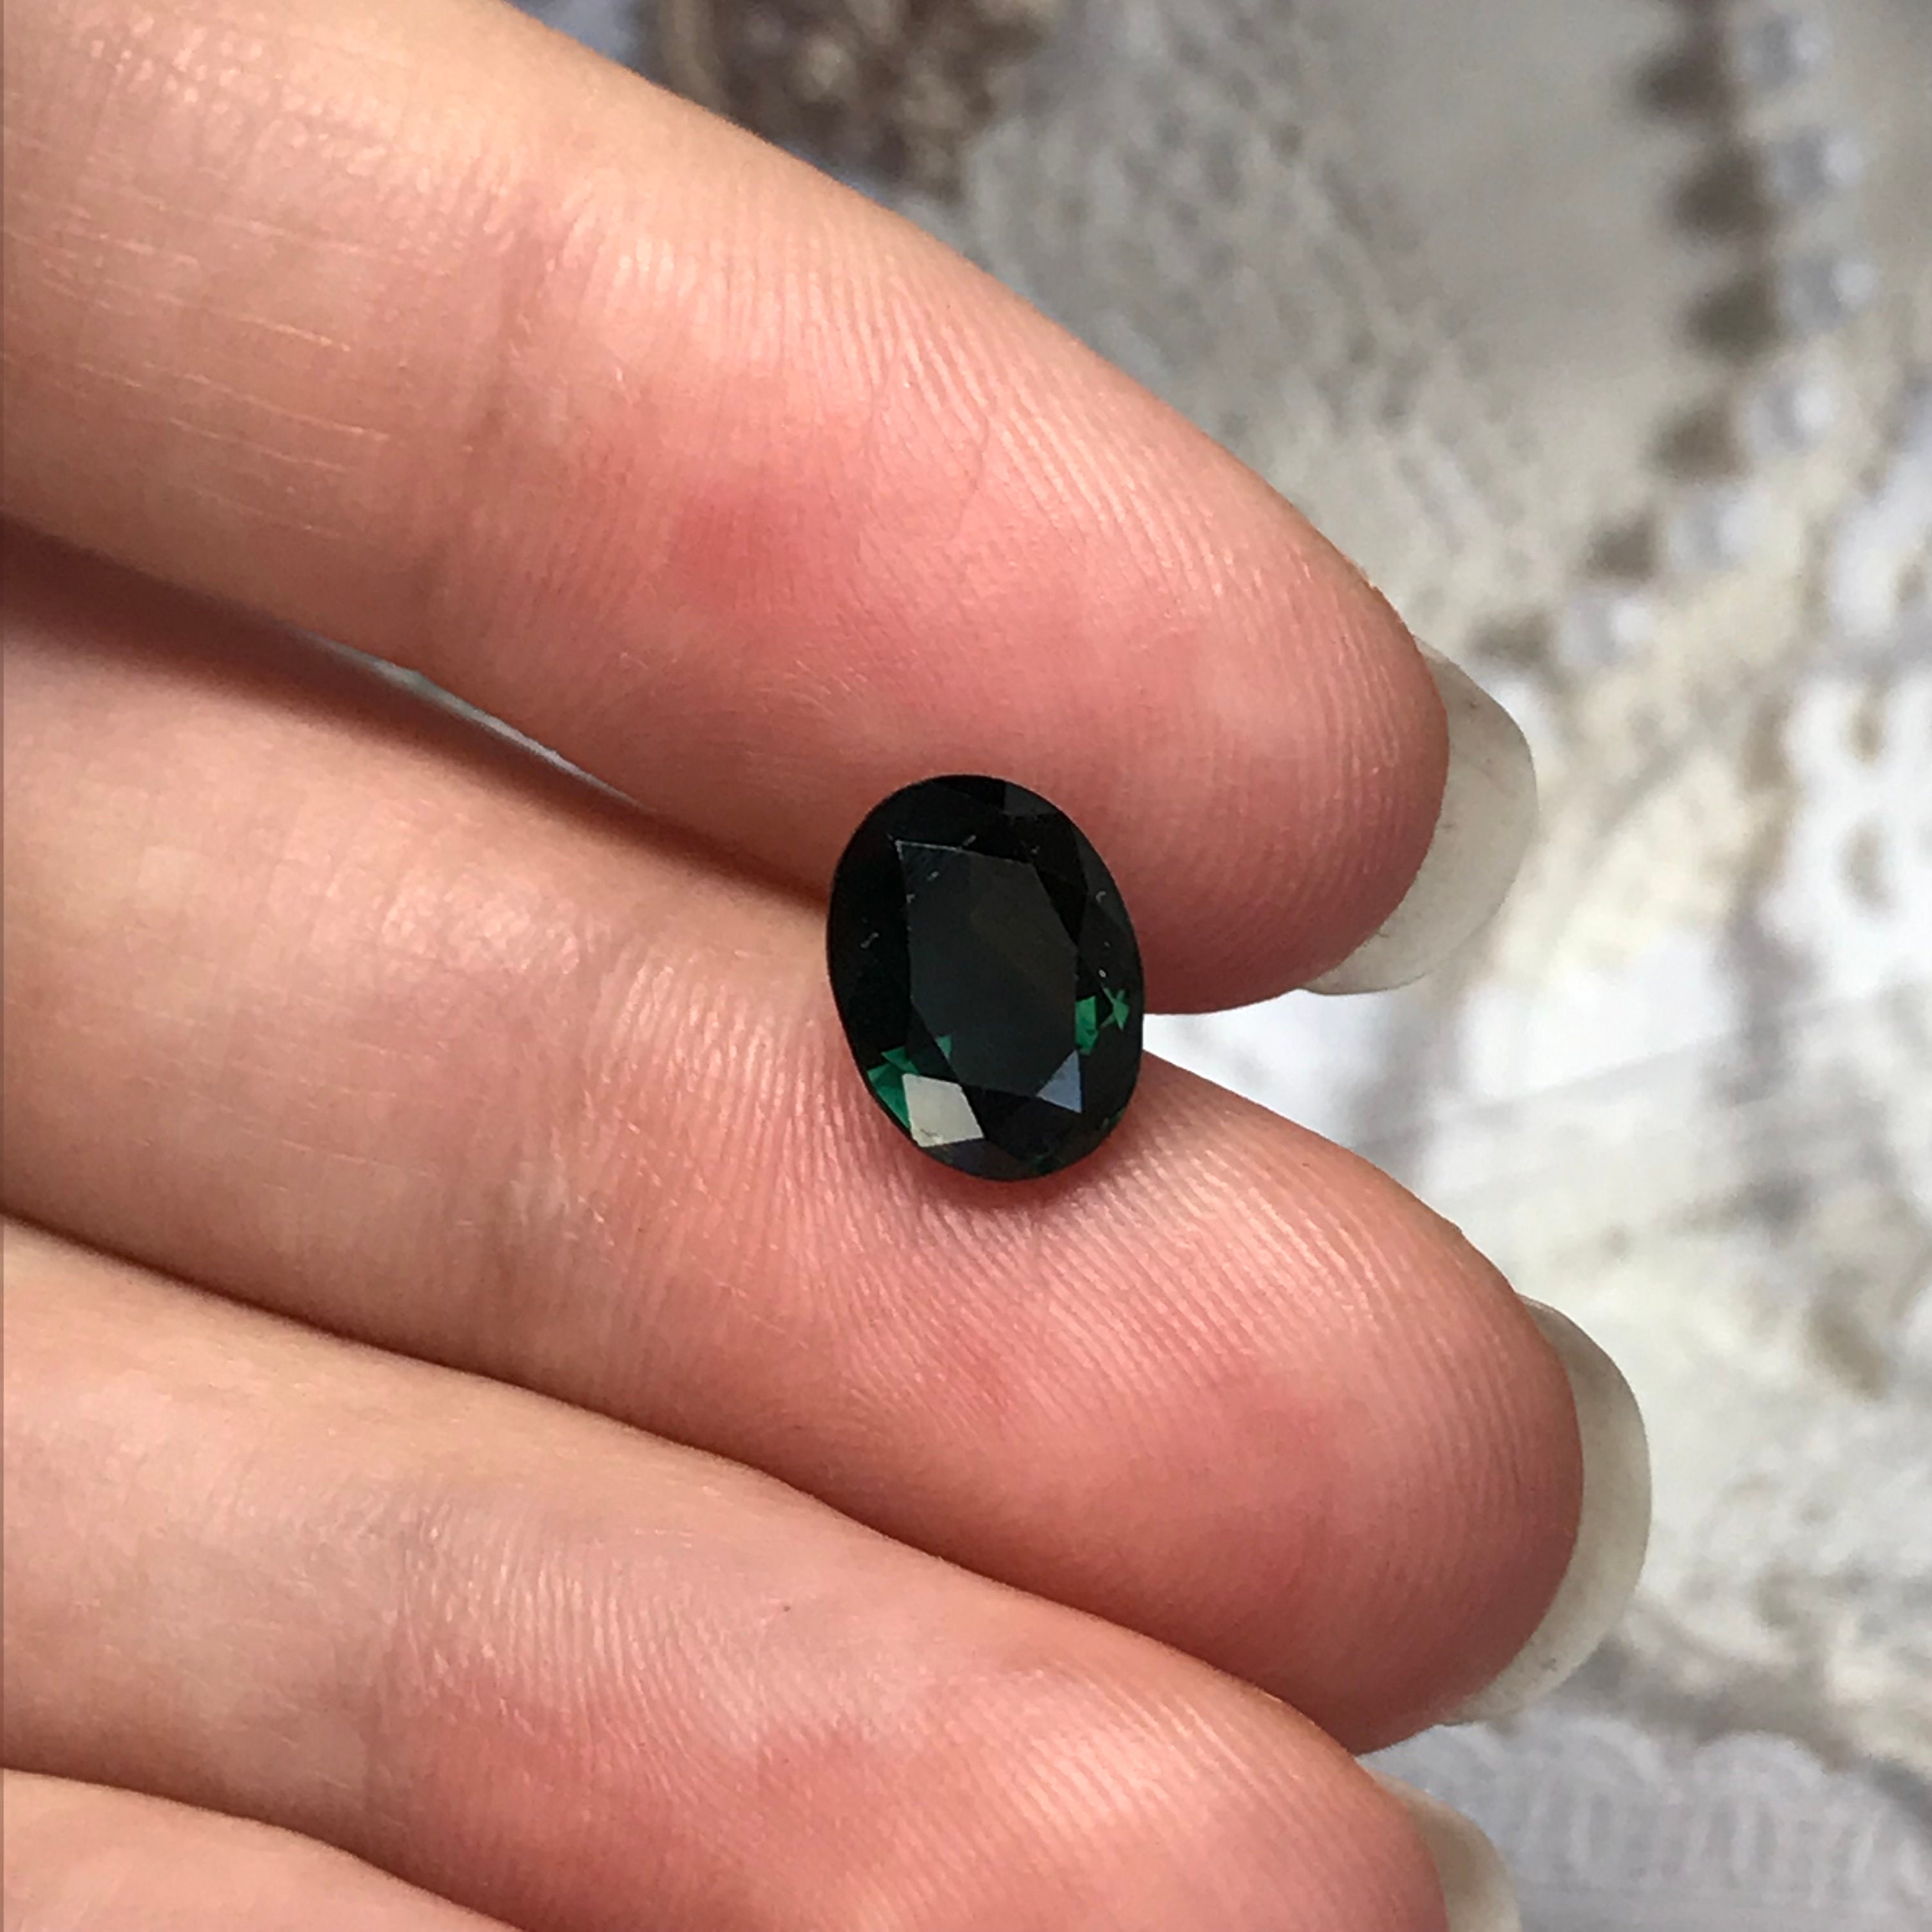 Certified 15.95 Carat Natural Light Green Sapphire Oval Shape Green Color Sapphire Loose Gemstone Free Shipping worldwide A